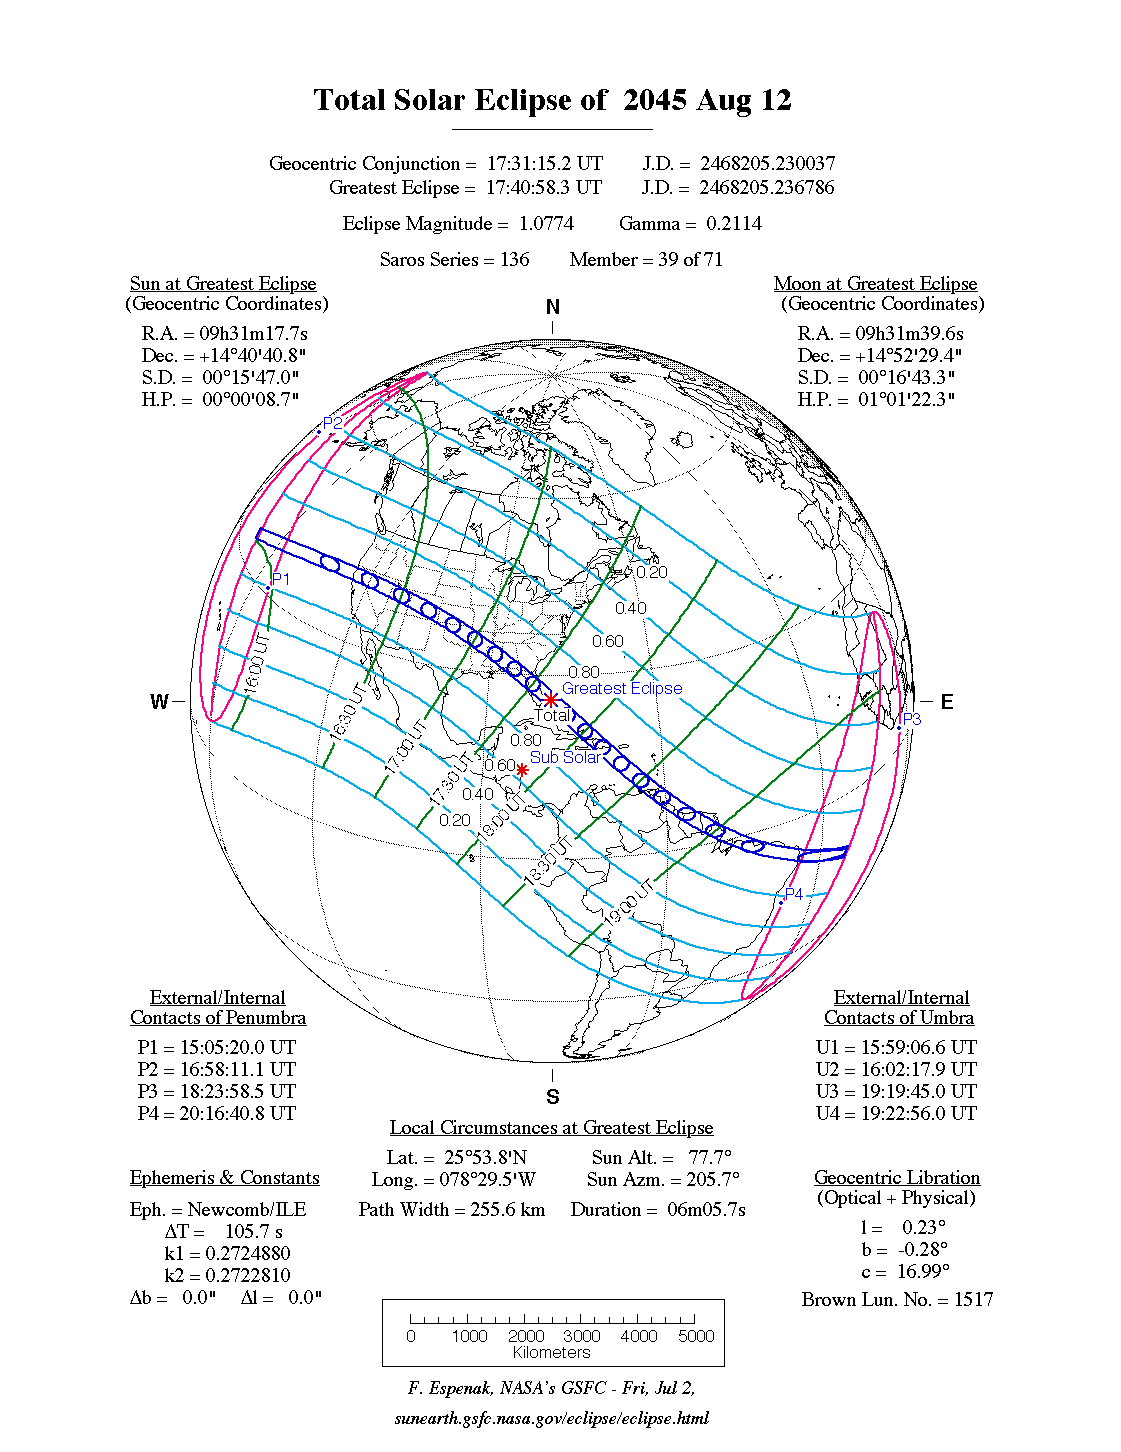 Solar eclipse of August 12, 2045 - Wikipedia